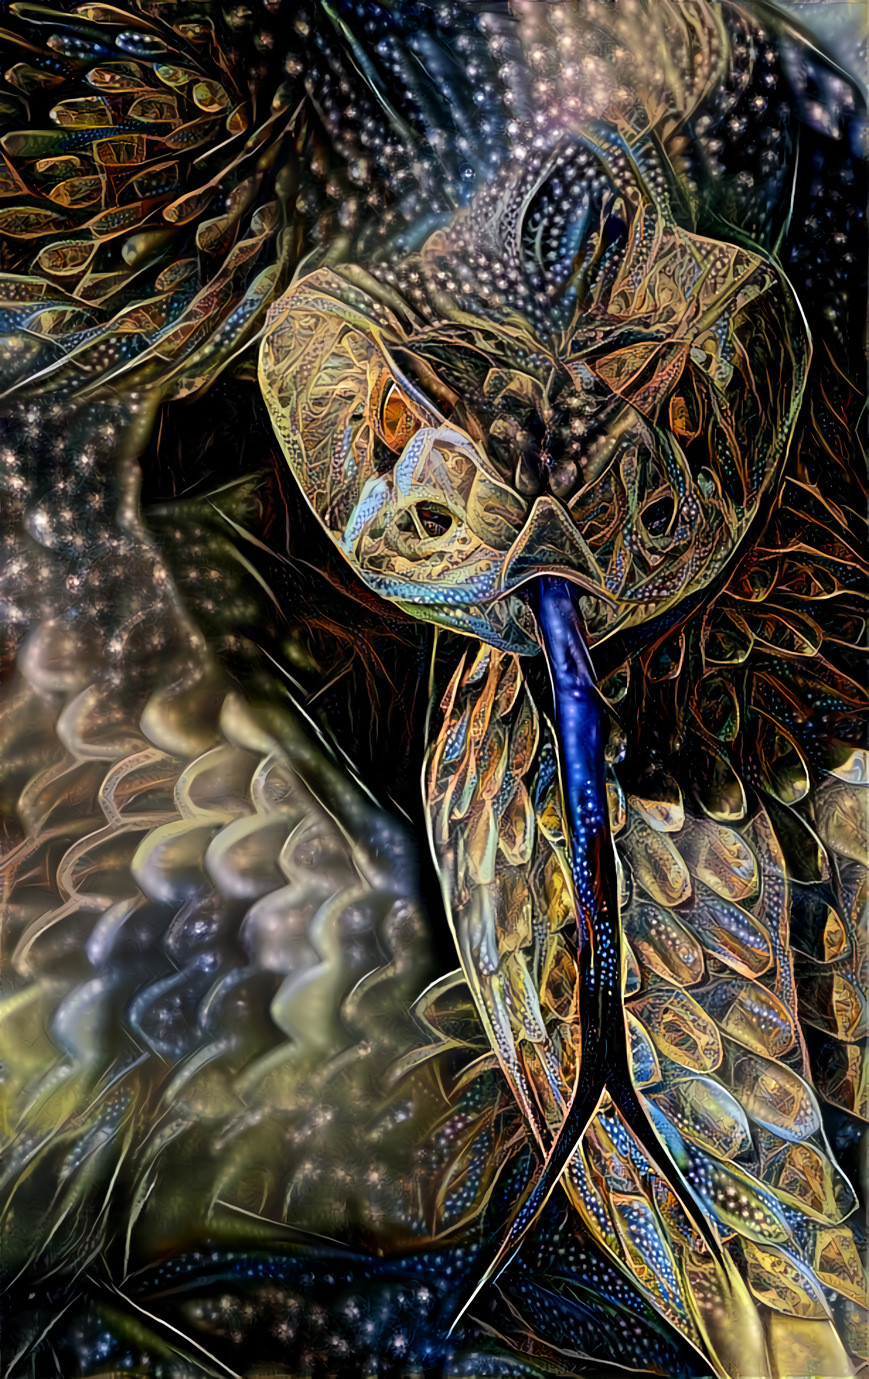 Snake with Golden Eyes